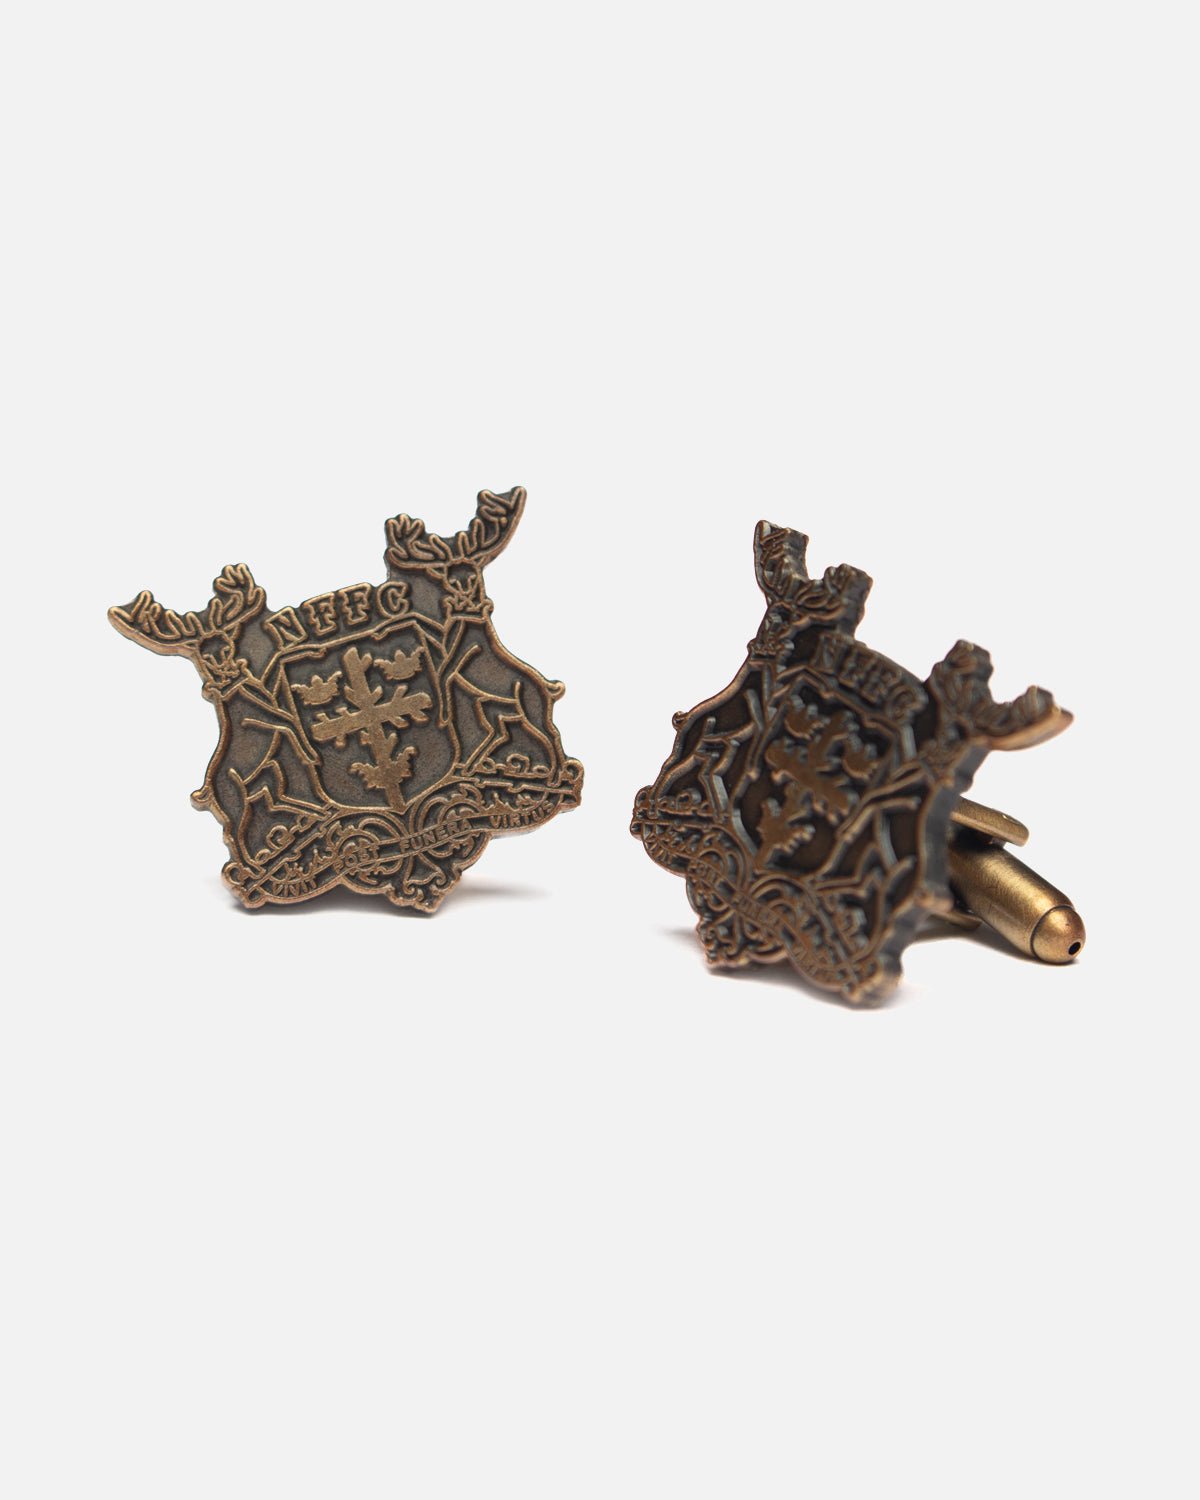 NFFC Antique Stags Cufflinks - Nottingham Forest FC